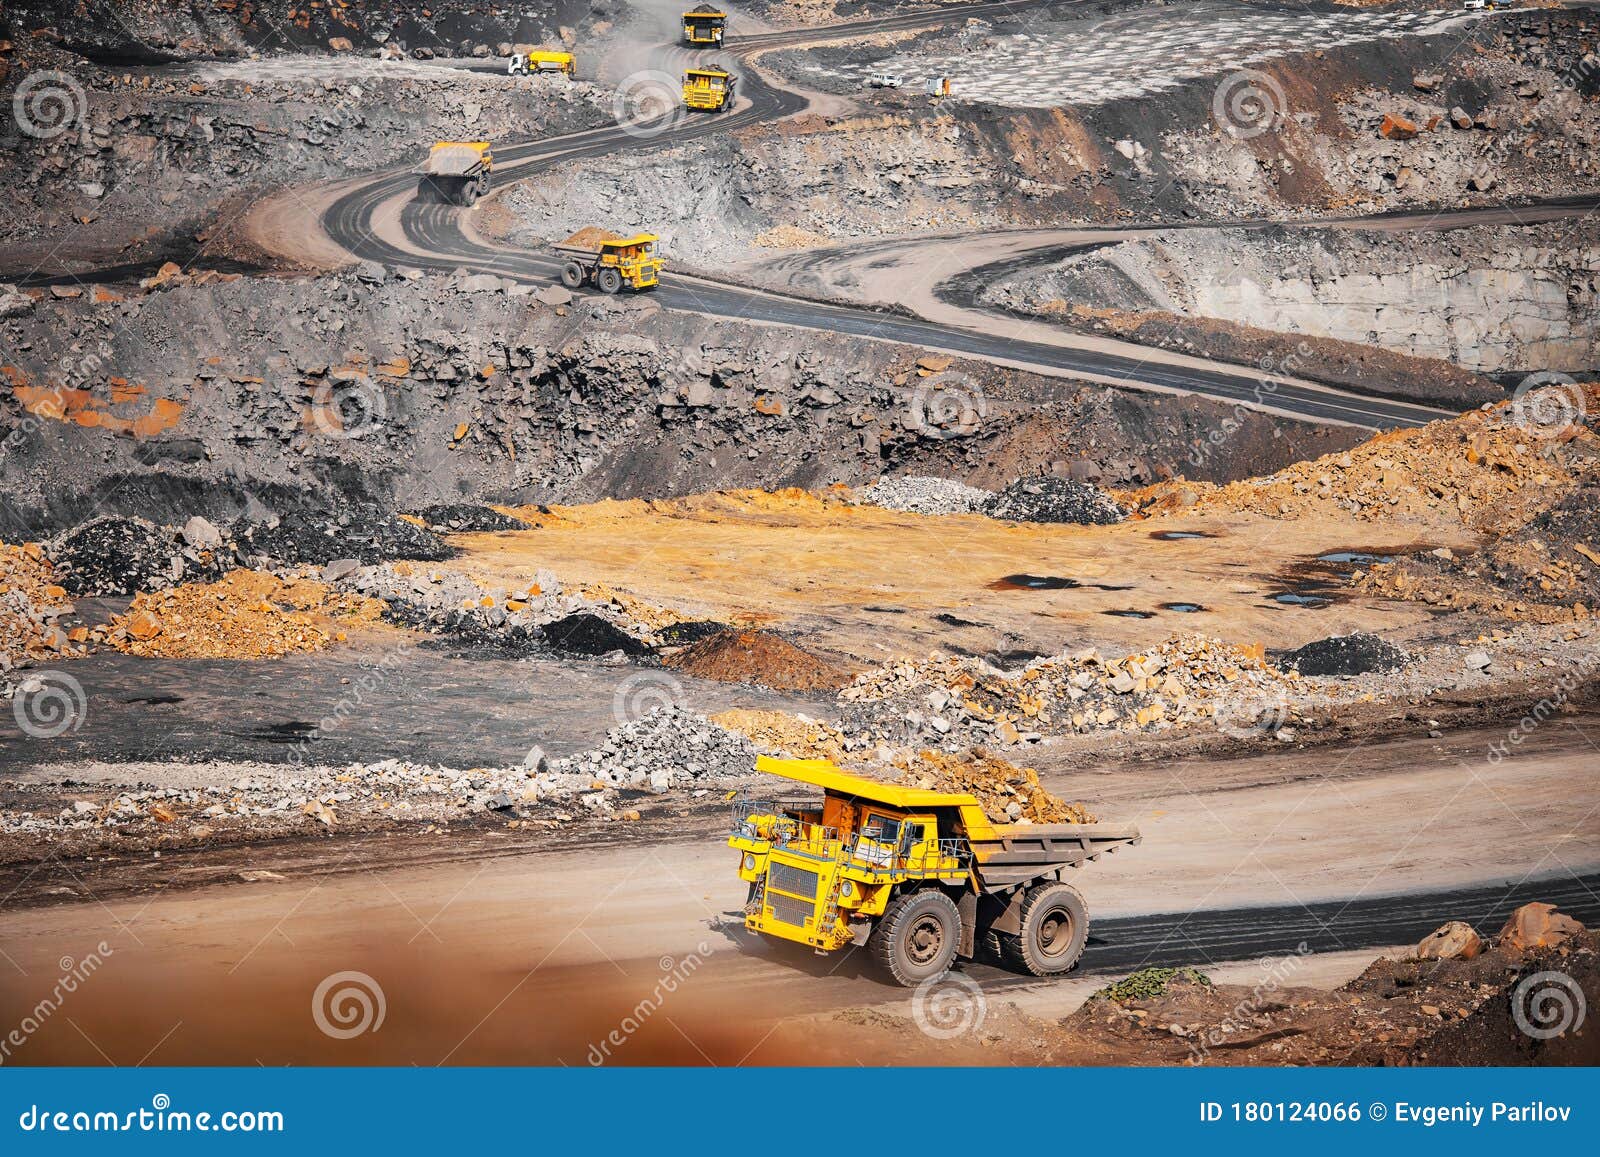 big yellow mining truck transportation of gold ore. open pit mine industry